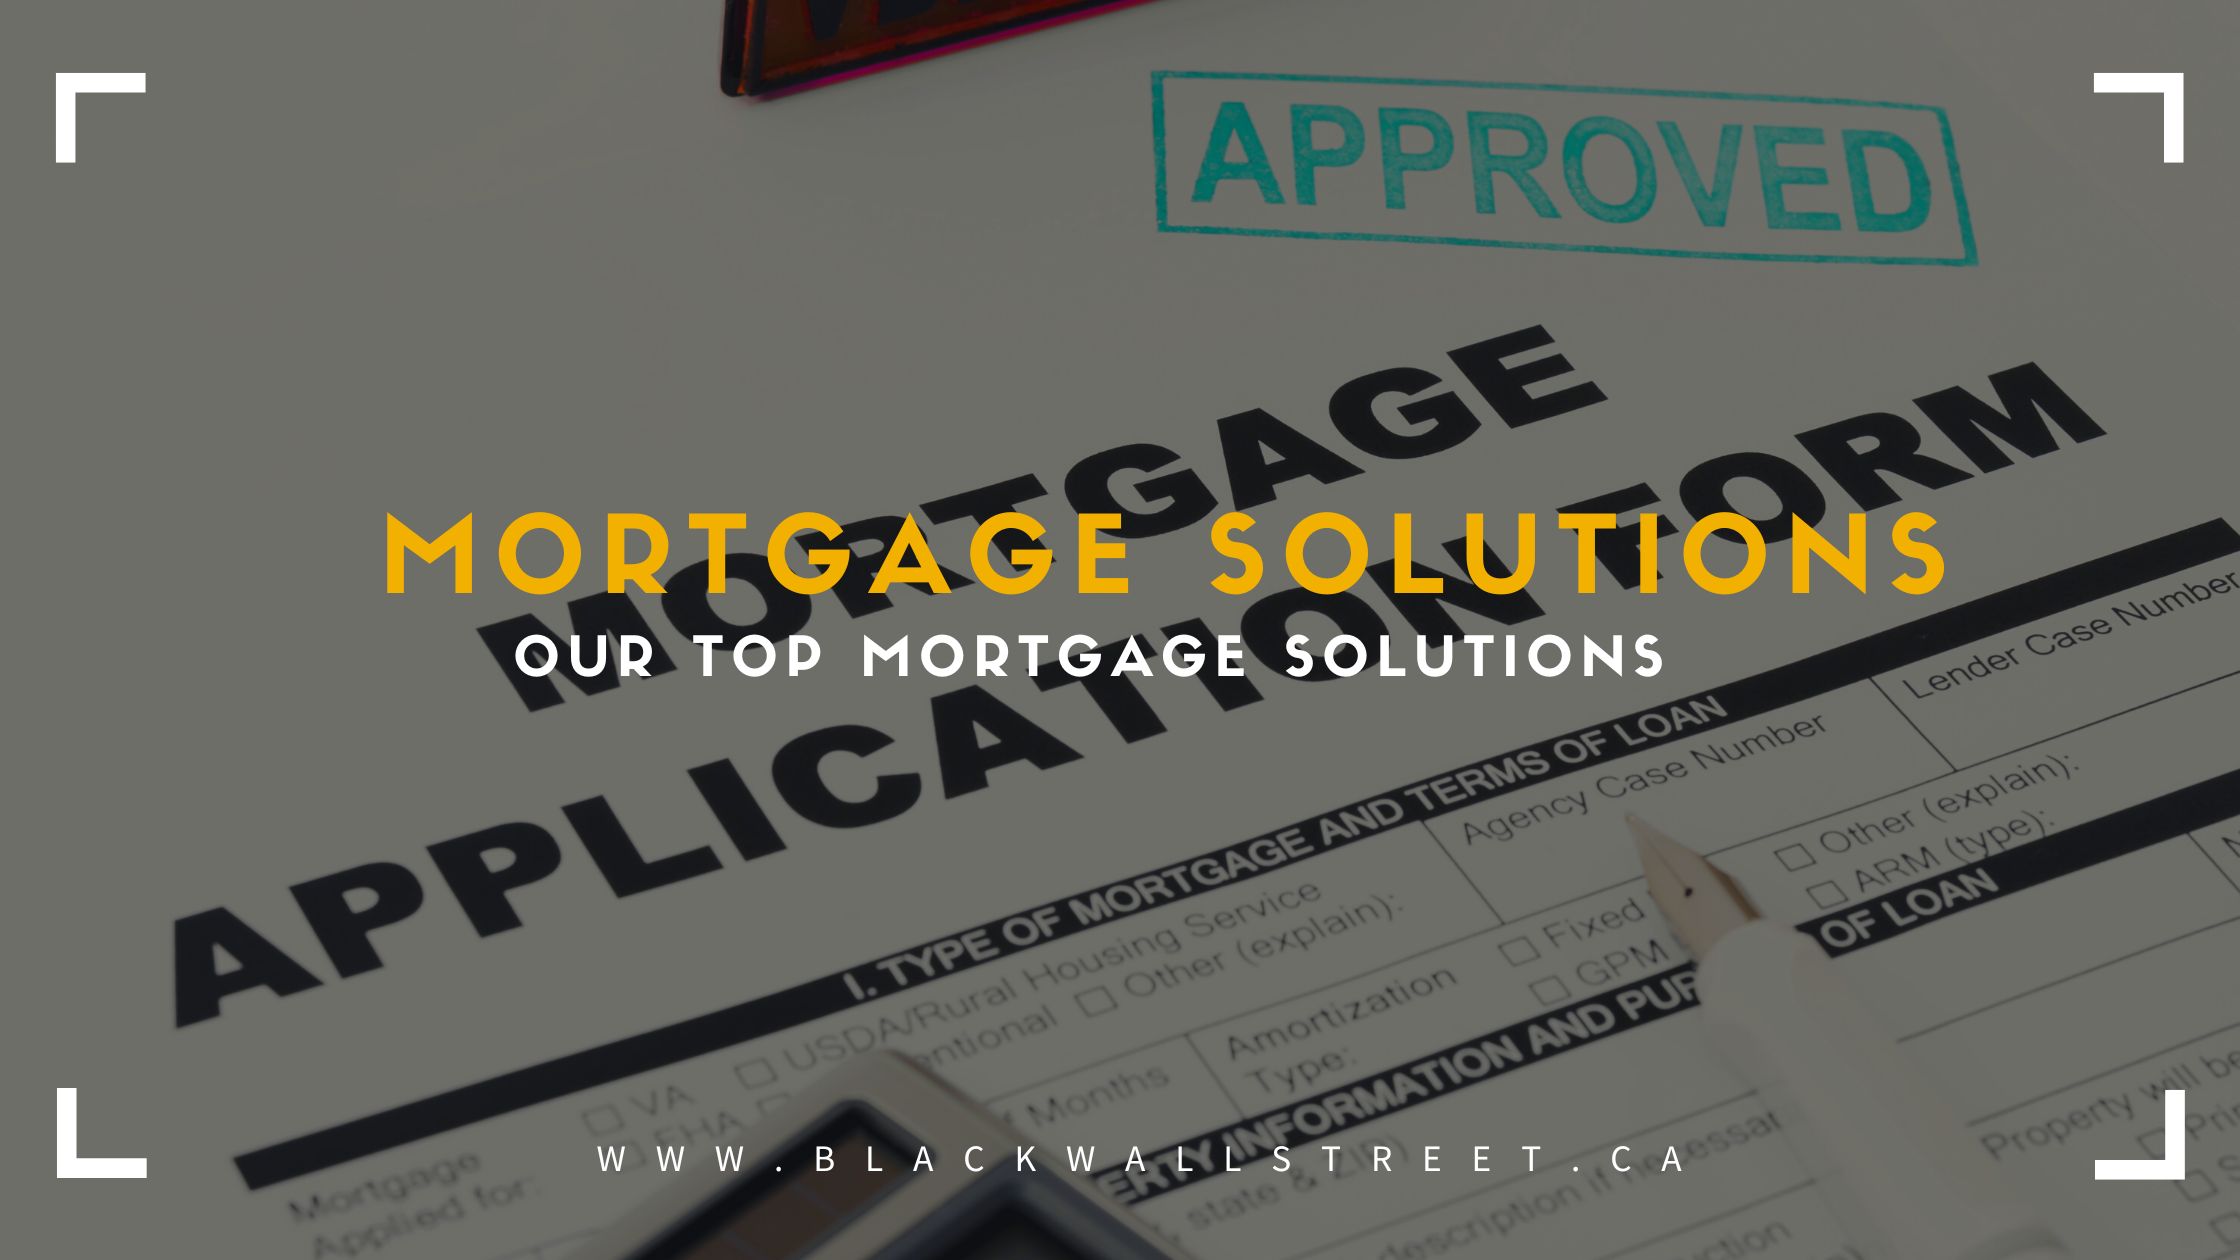 Mortgage Solutions Pre-Approval- by Black Wall Street Canada